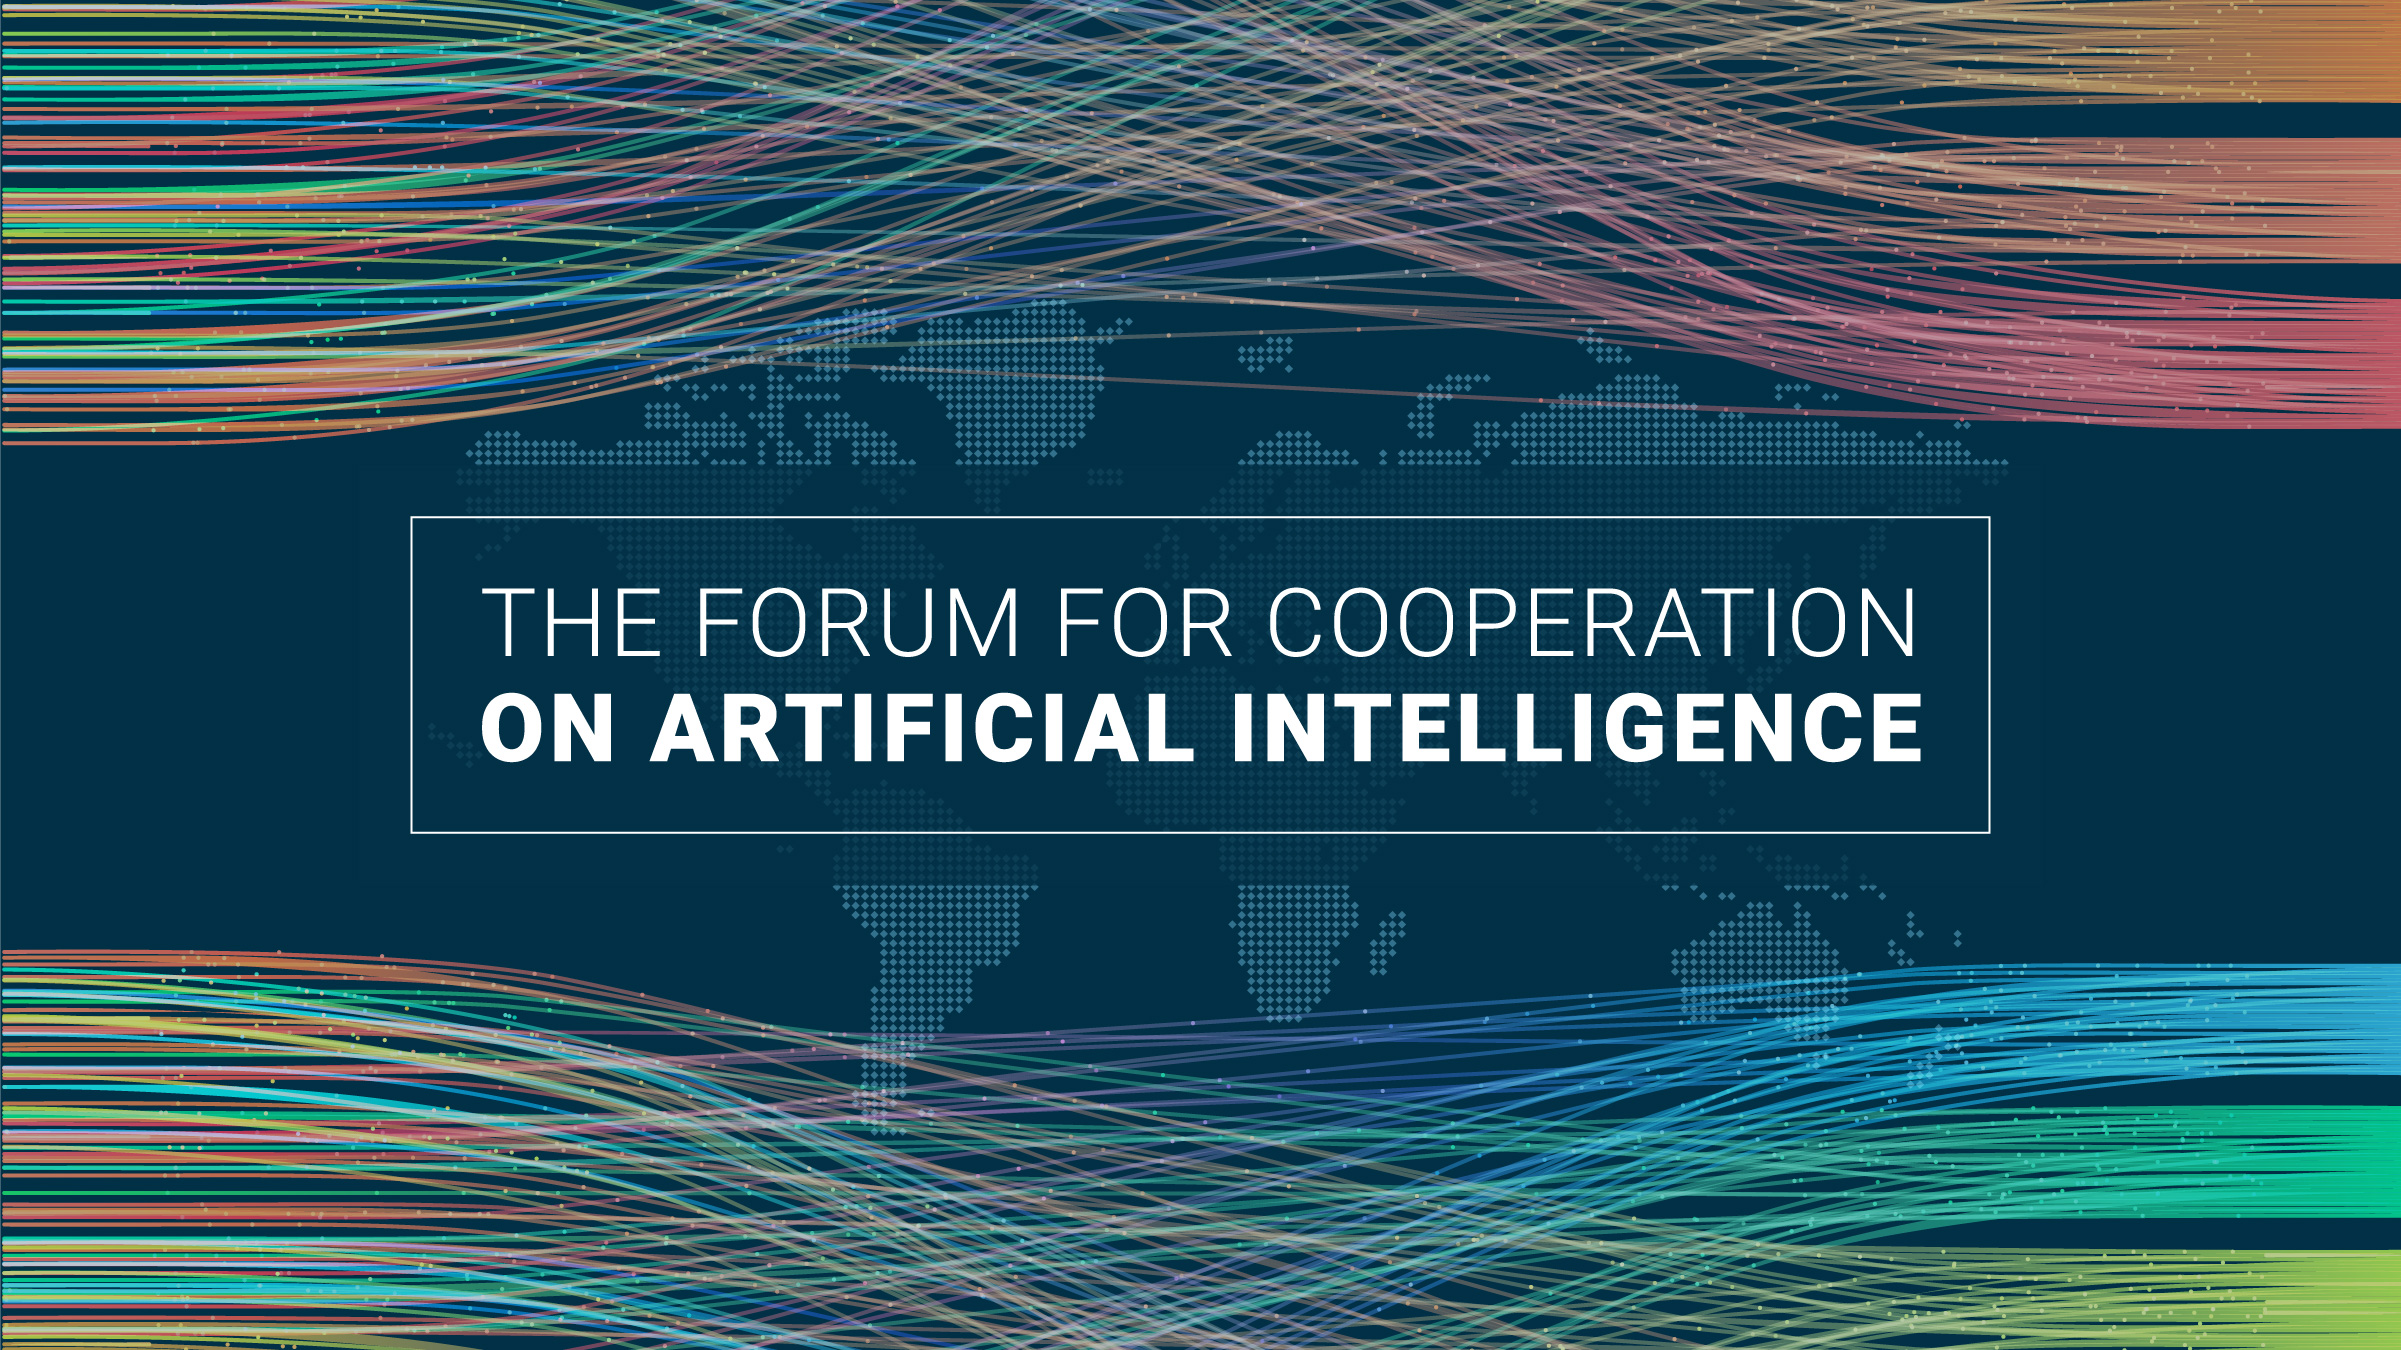 The Forum for Cooperation on Artificial Intelligence